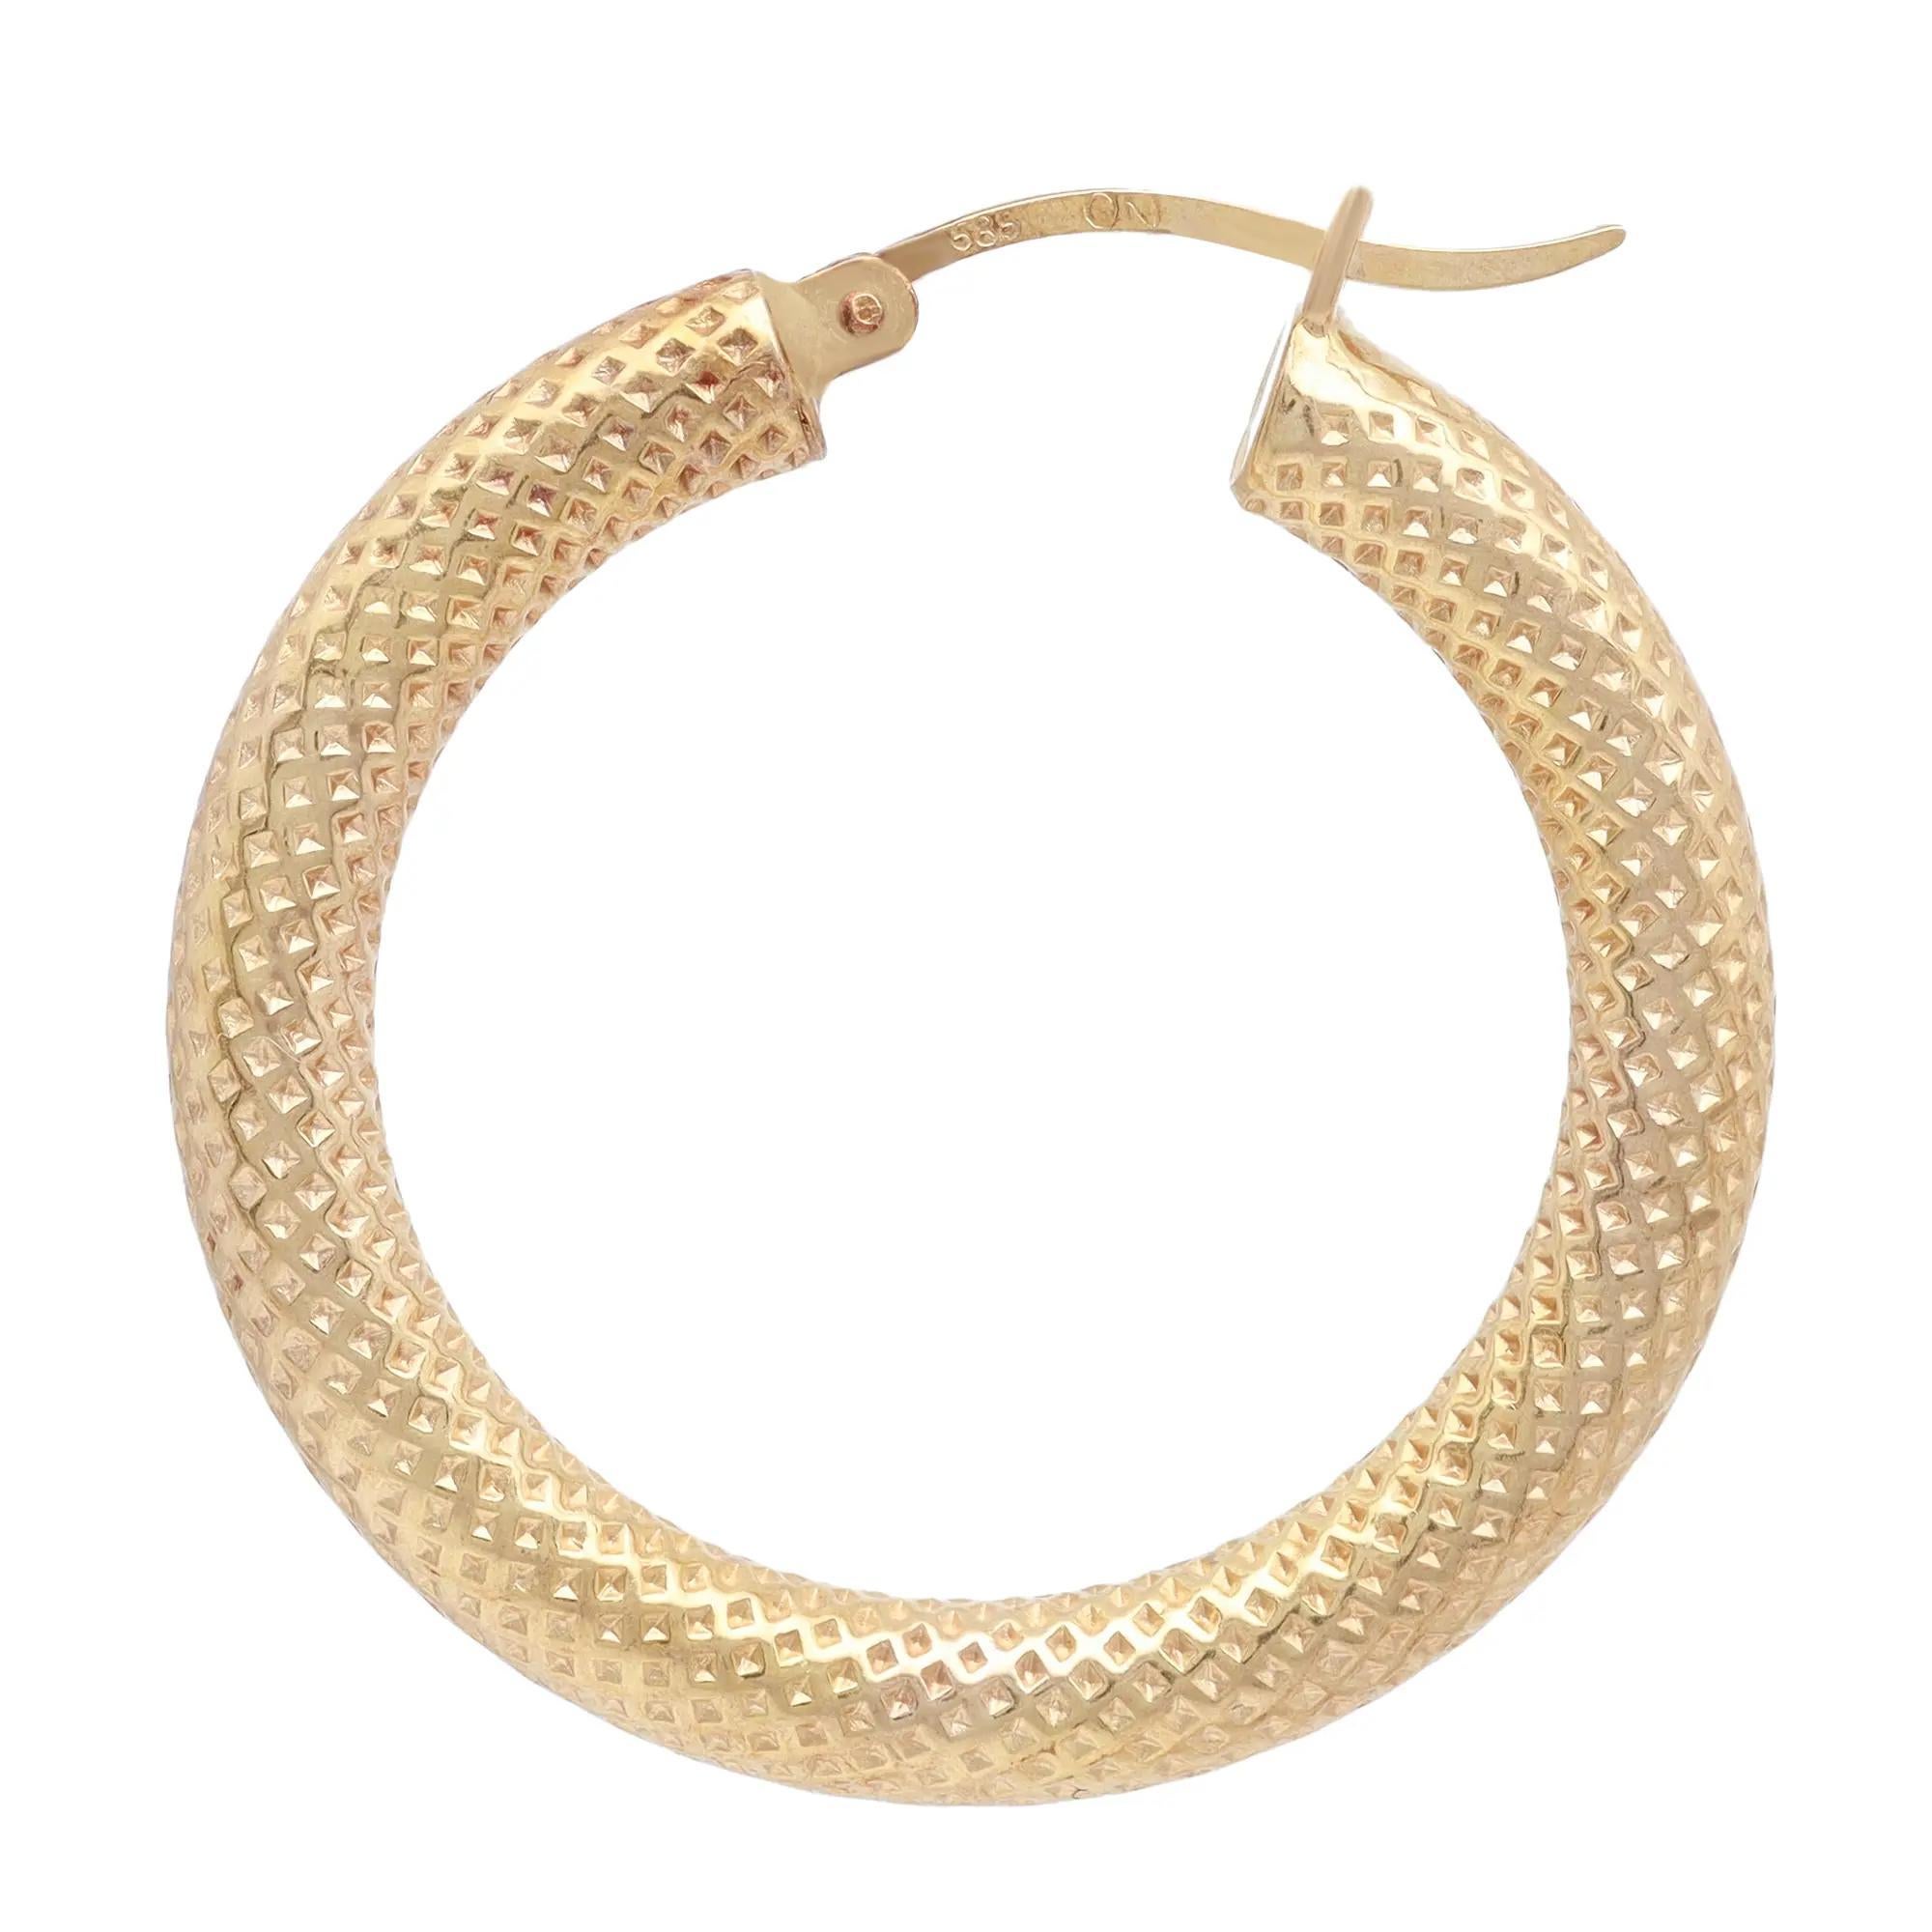 Elevate any attire with these dazzling textured hollow hoop earrings. Crafted in lustrous 14K yellow gold. Earring length: 1.1 inches. Width: 3.8mm. Total weight: 3.89 grams. Comes with a presentable gift box.
